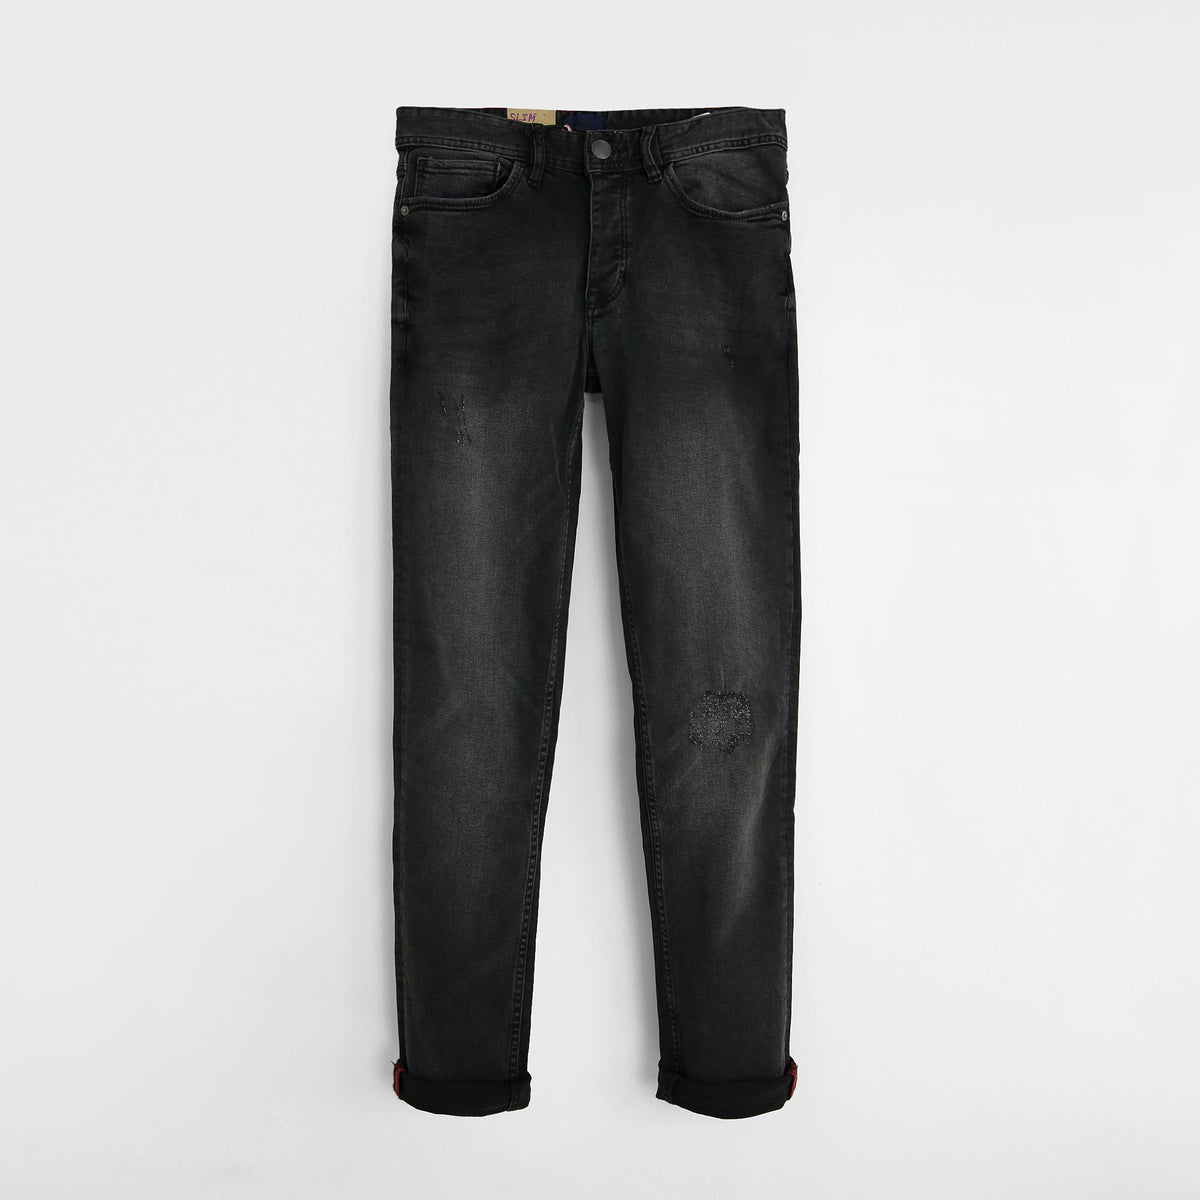 Aggregate 97+ distressed stretch jeans latest